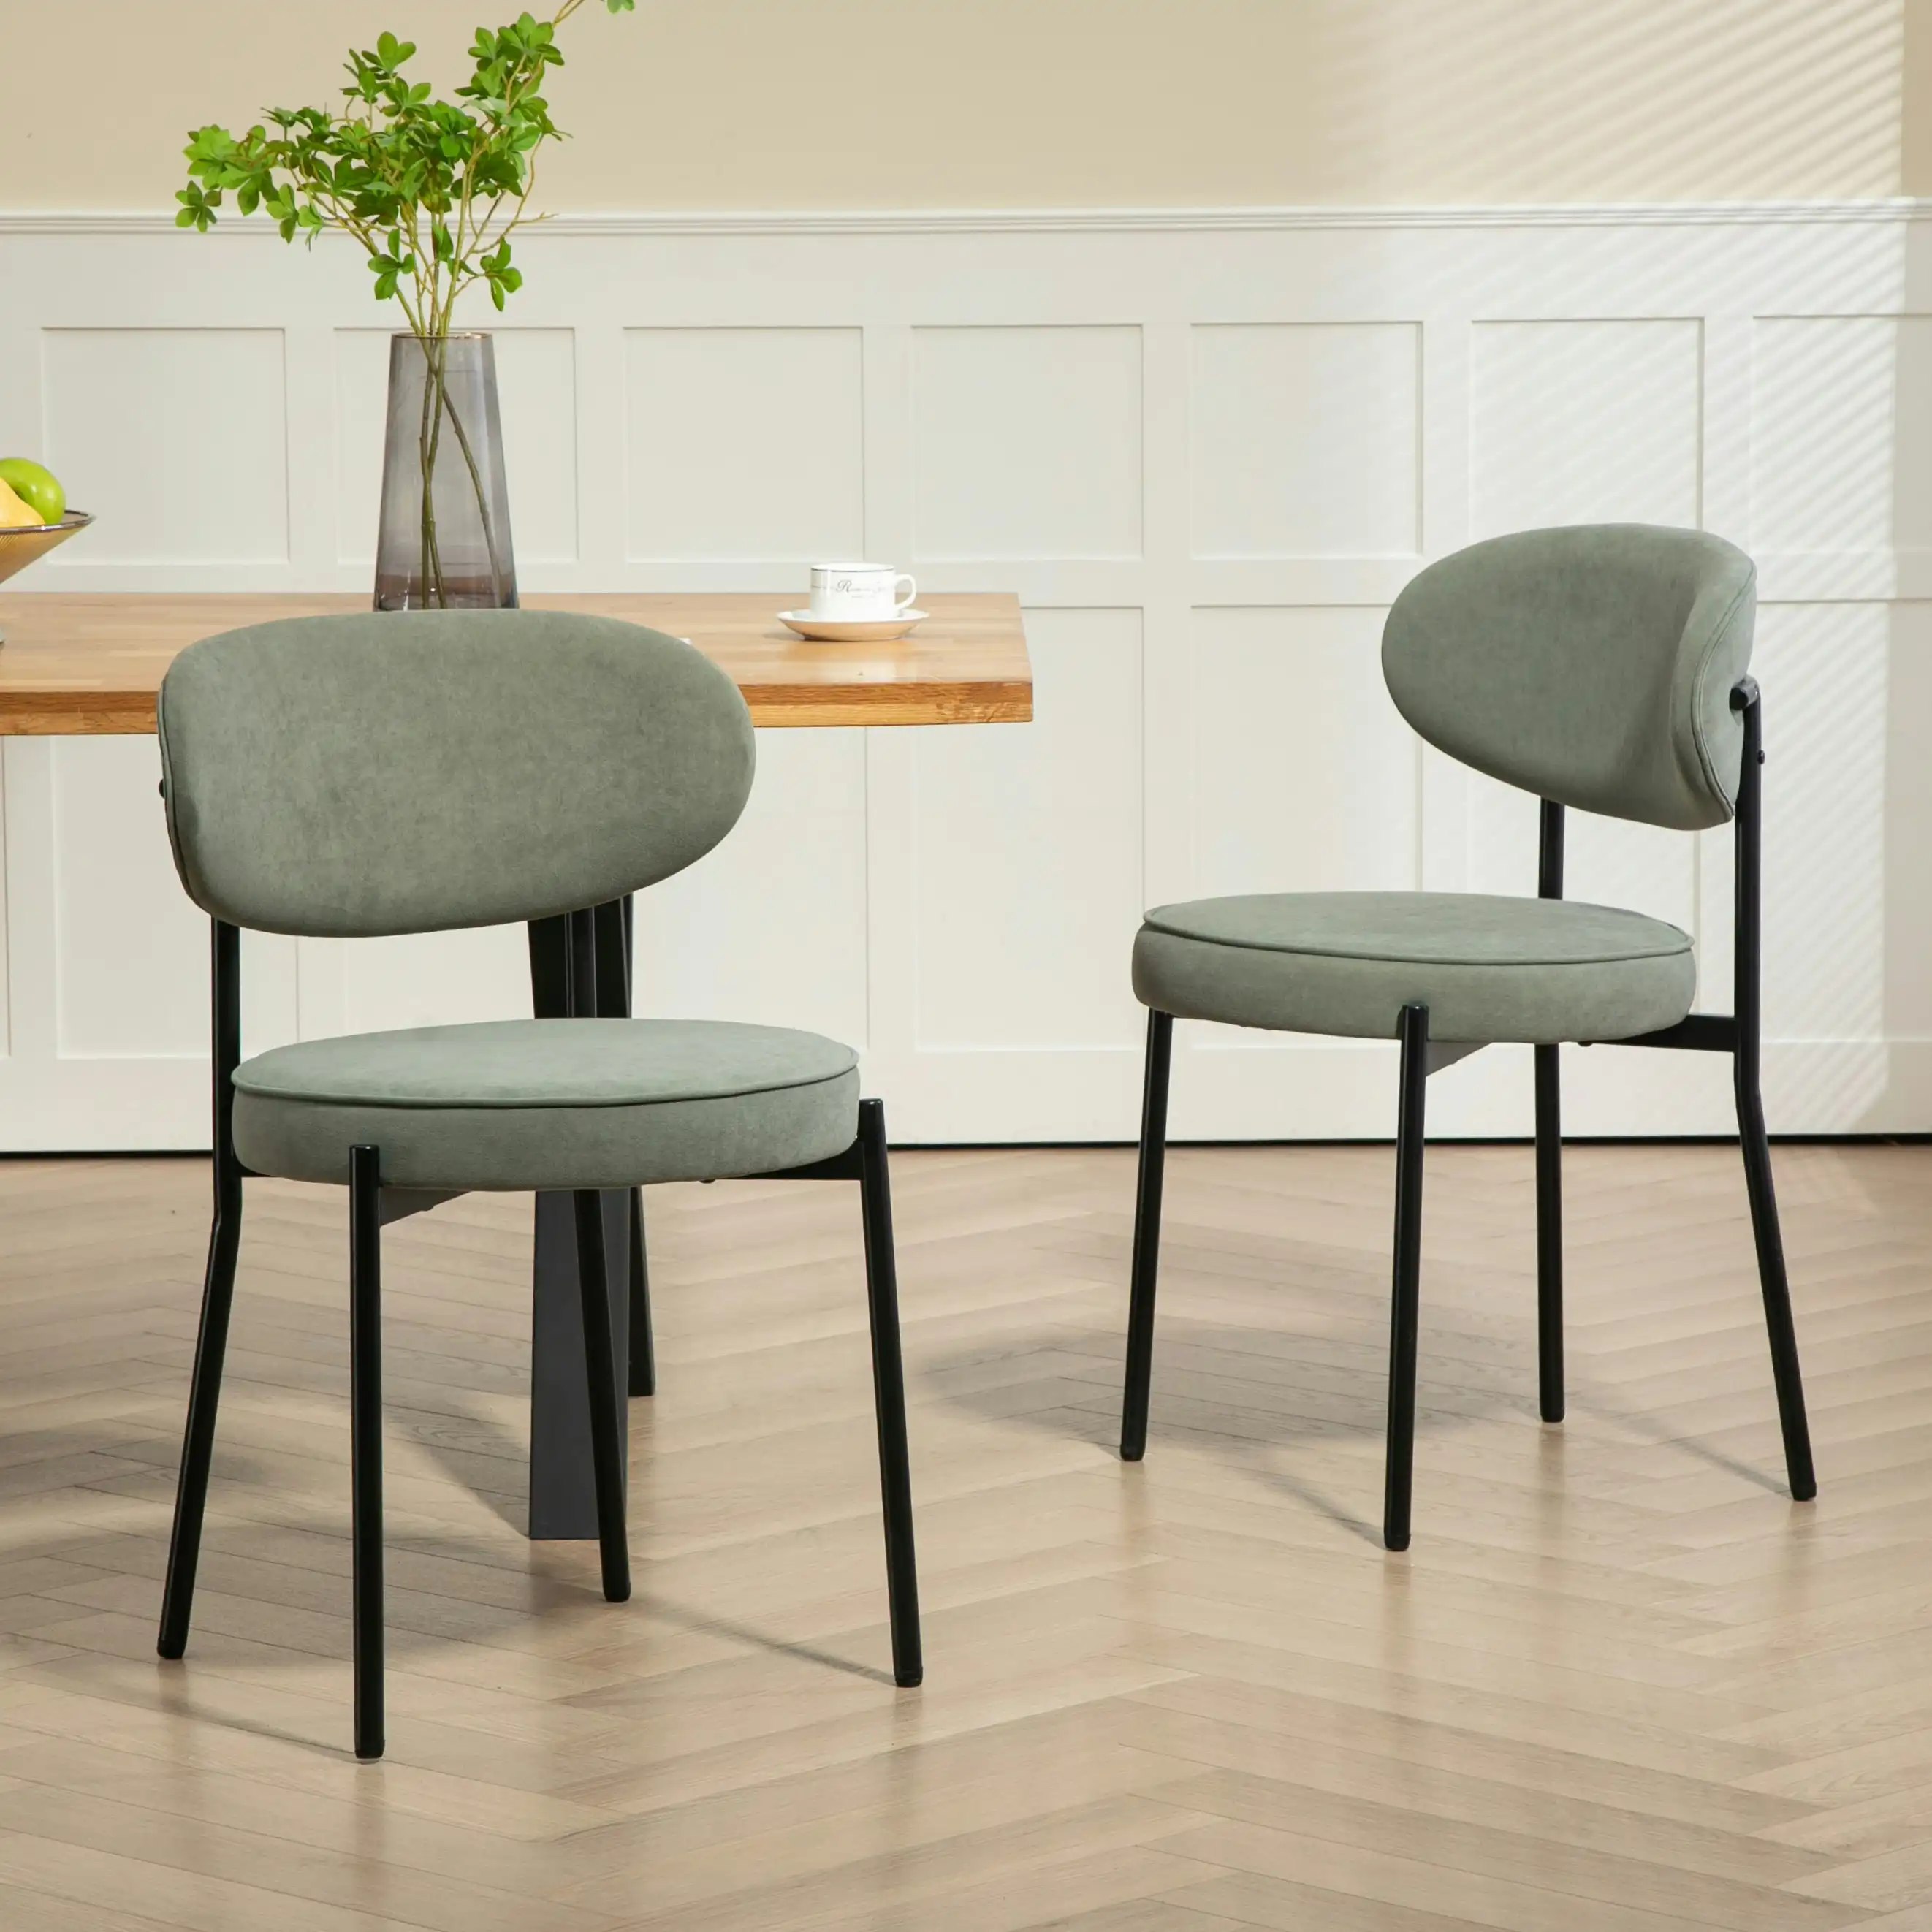 IHOMDEC Mid-Century Round Upholstered Dining Chair with Metal Frame and Legs Set of 2 Green